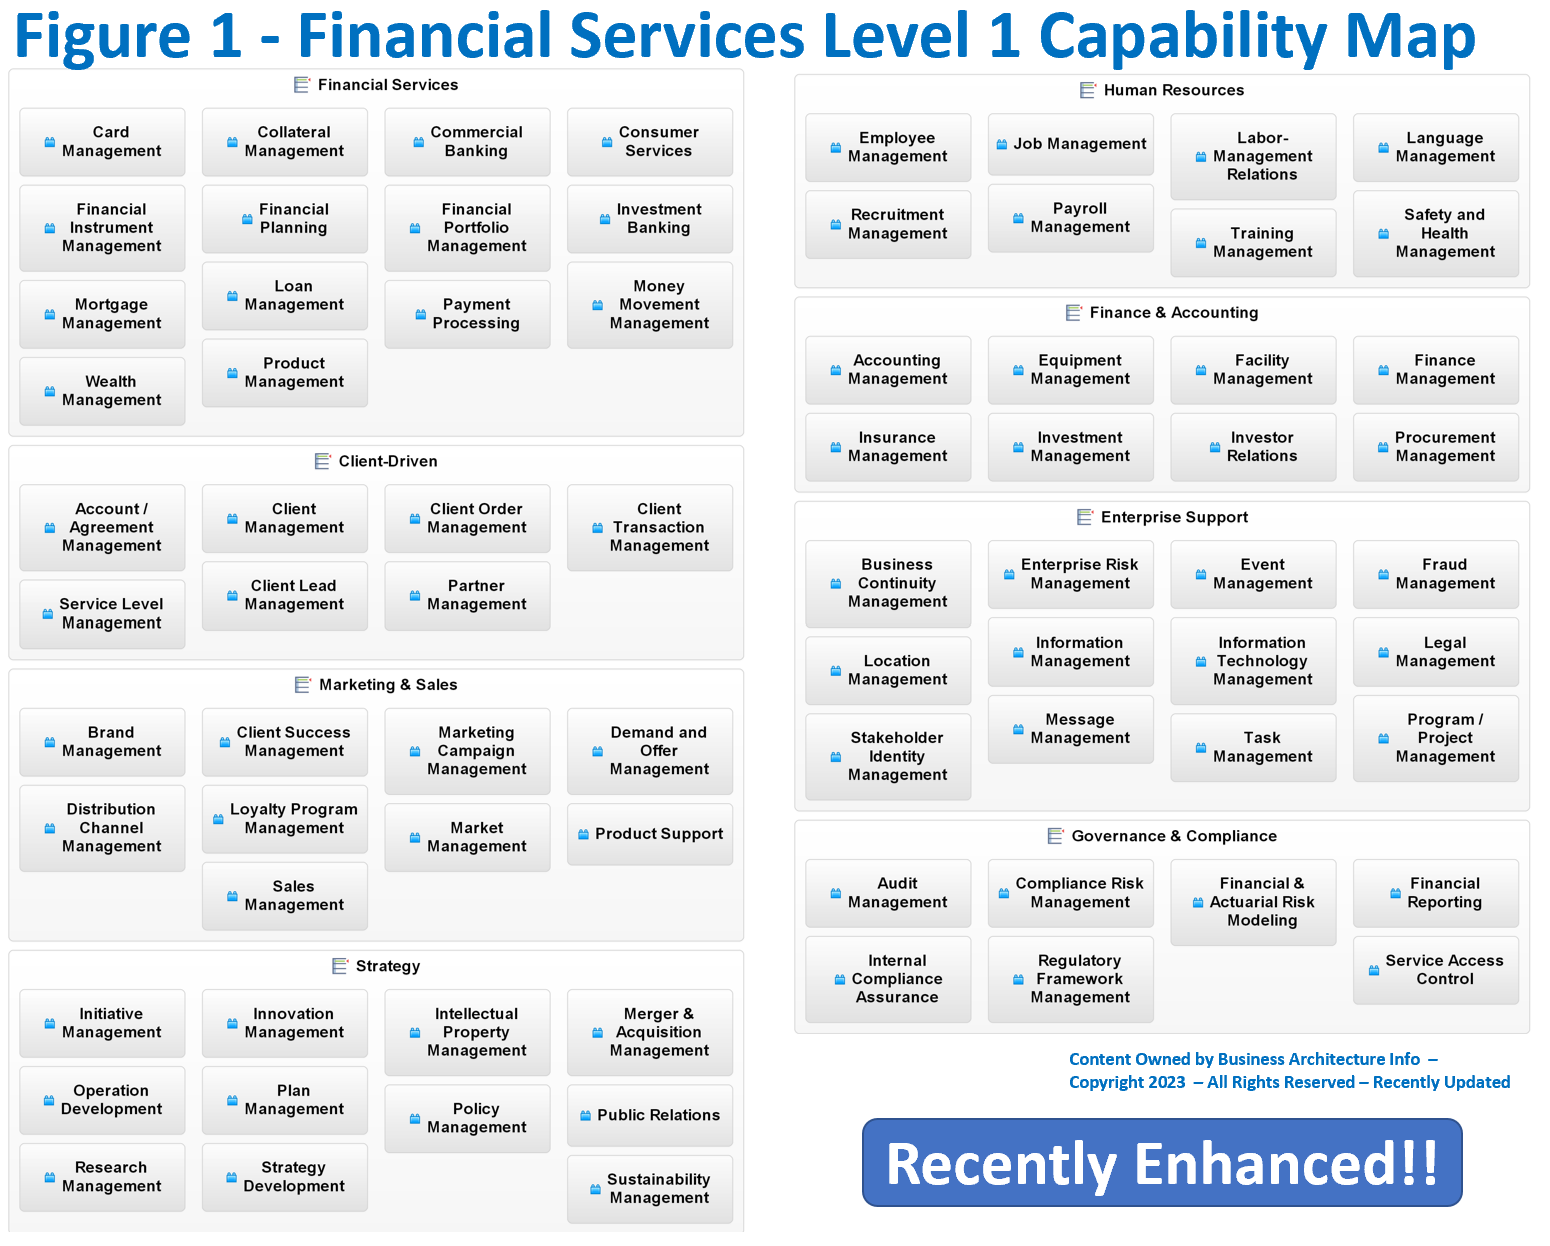 What Is a Capability Model?